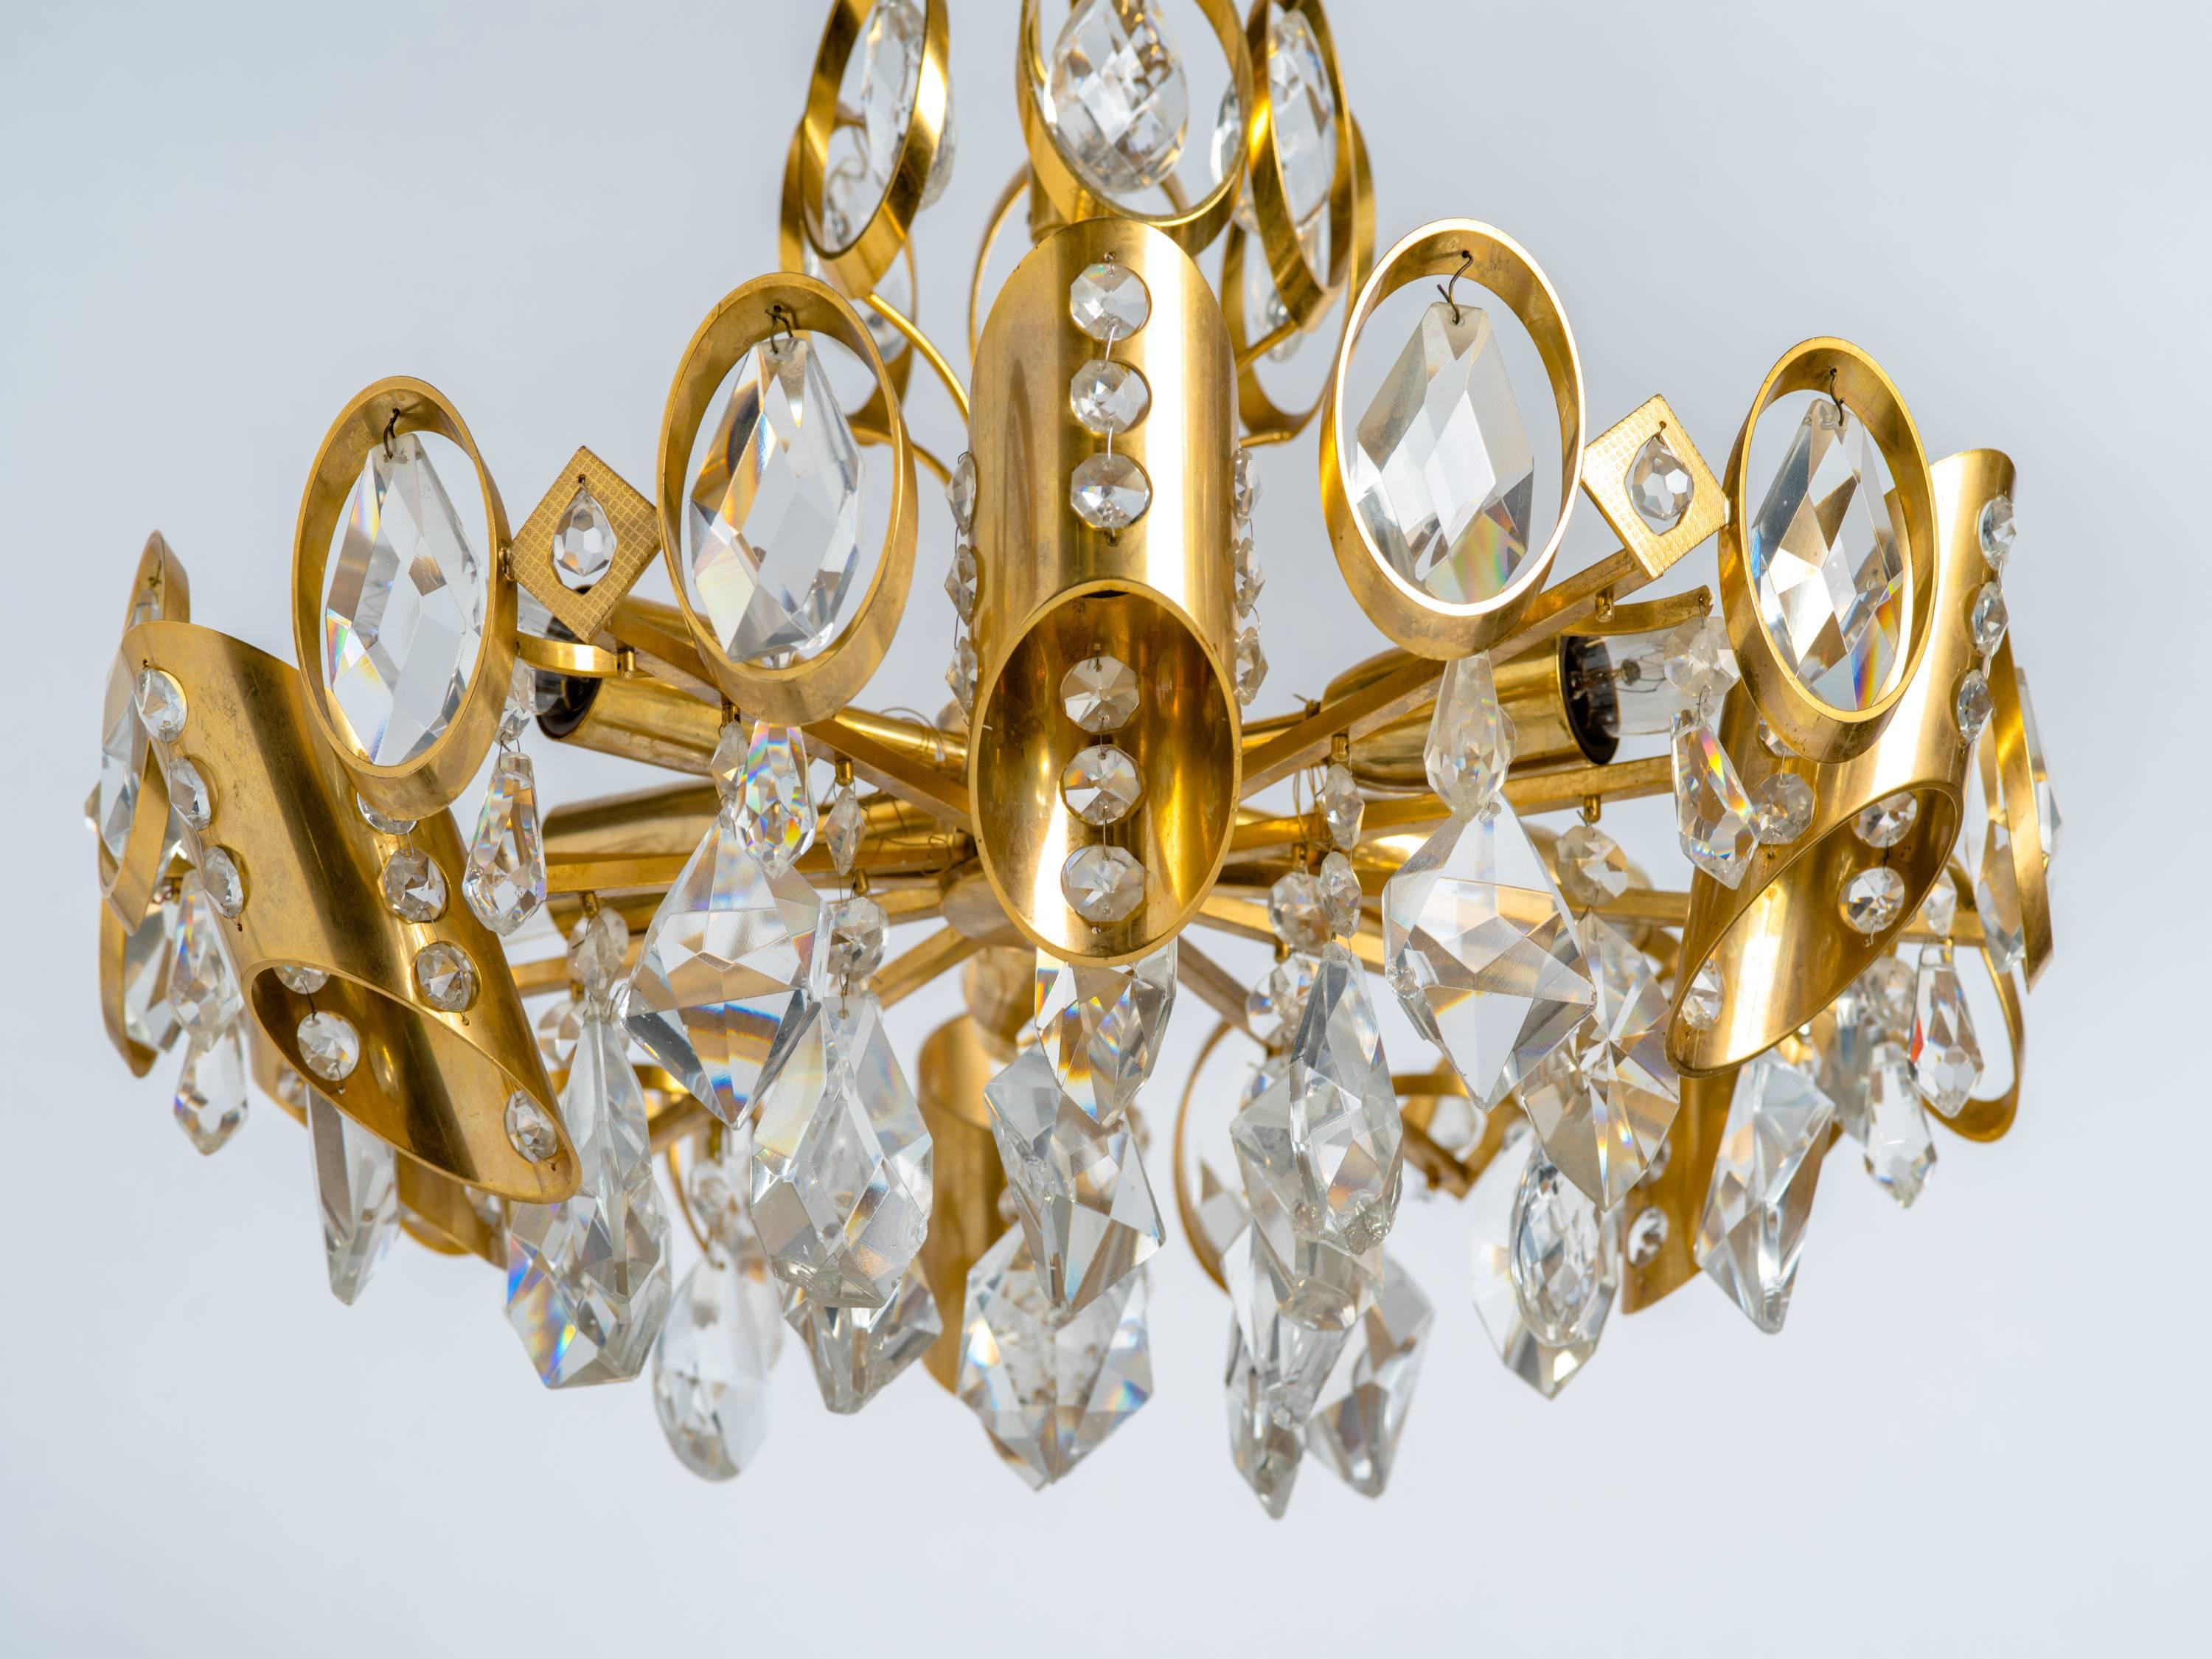 Austrian Hollywood Regency Jeweled Crystal and Gilded Chandelier by Palwa